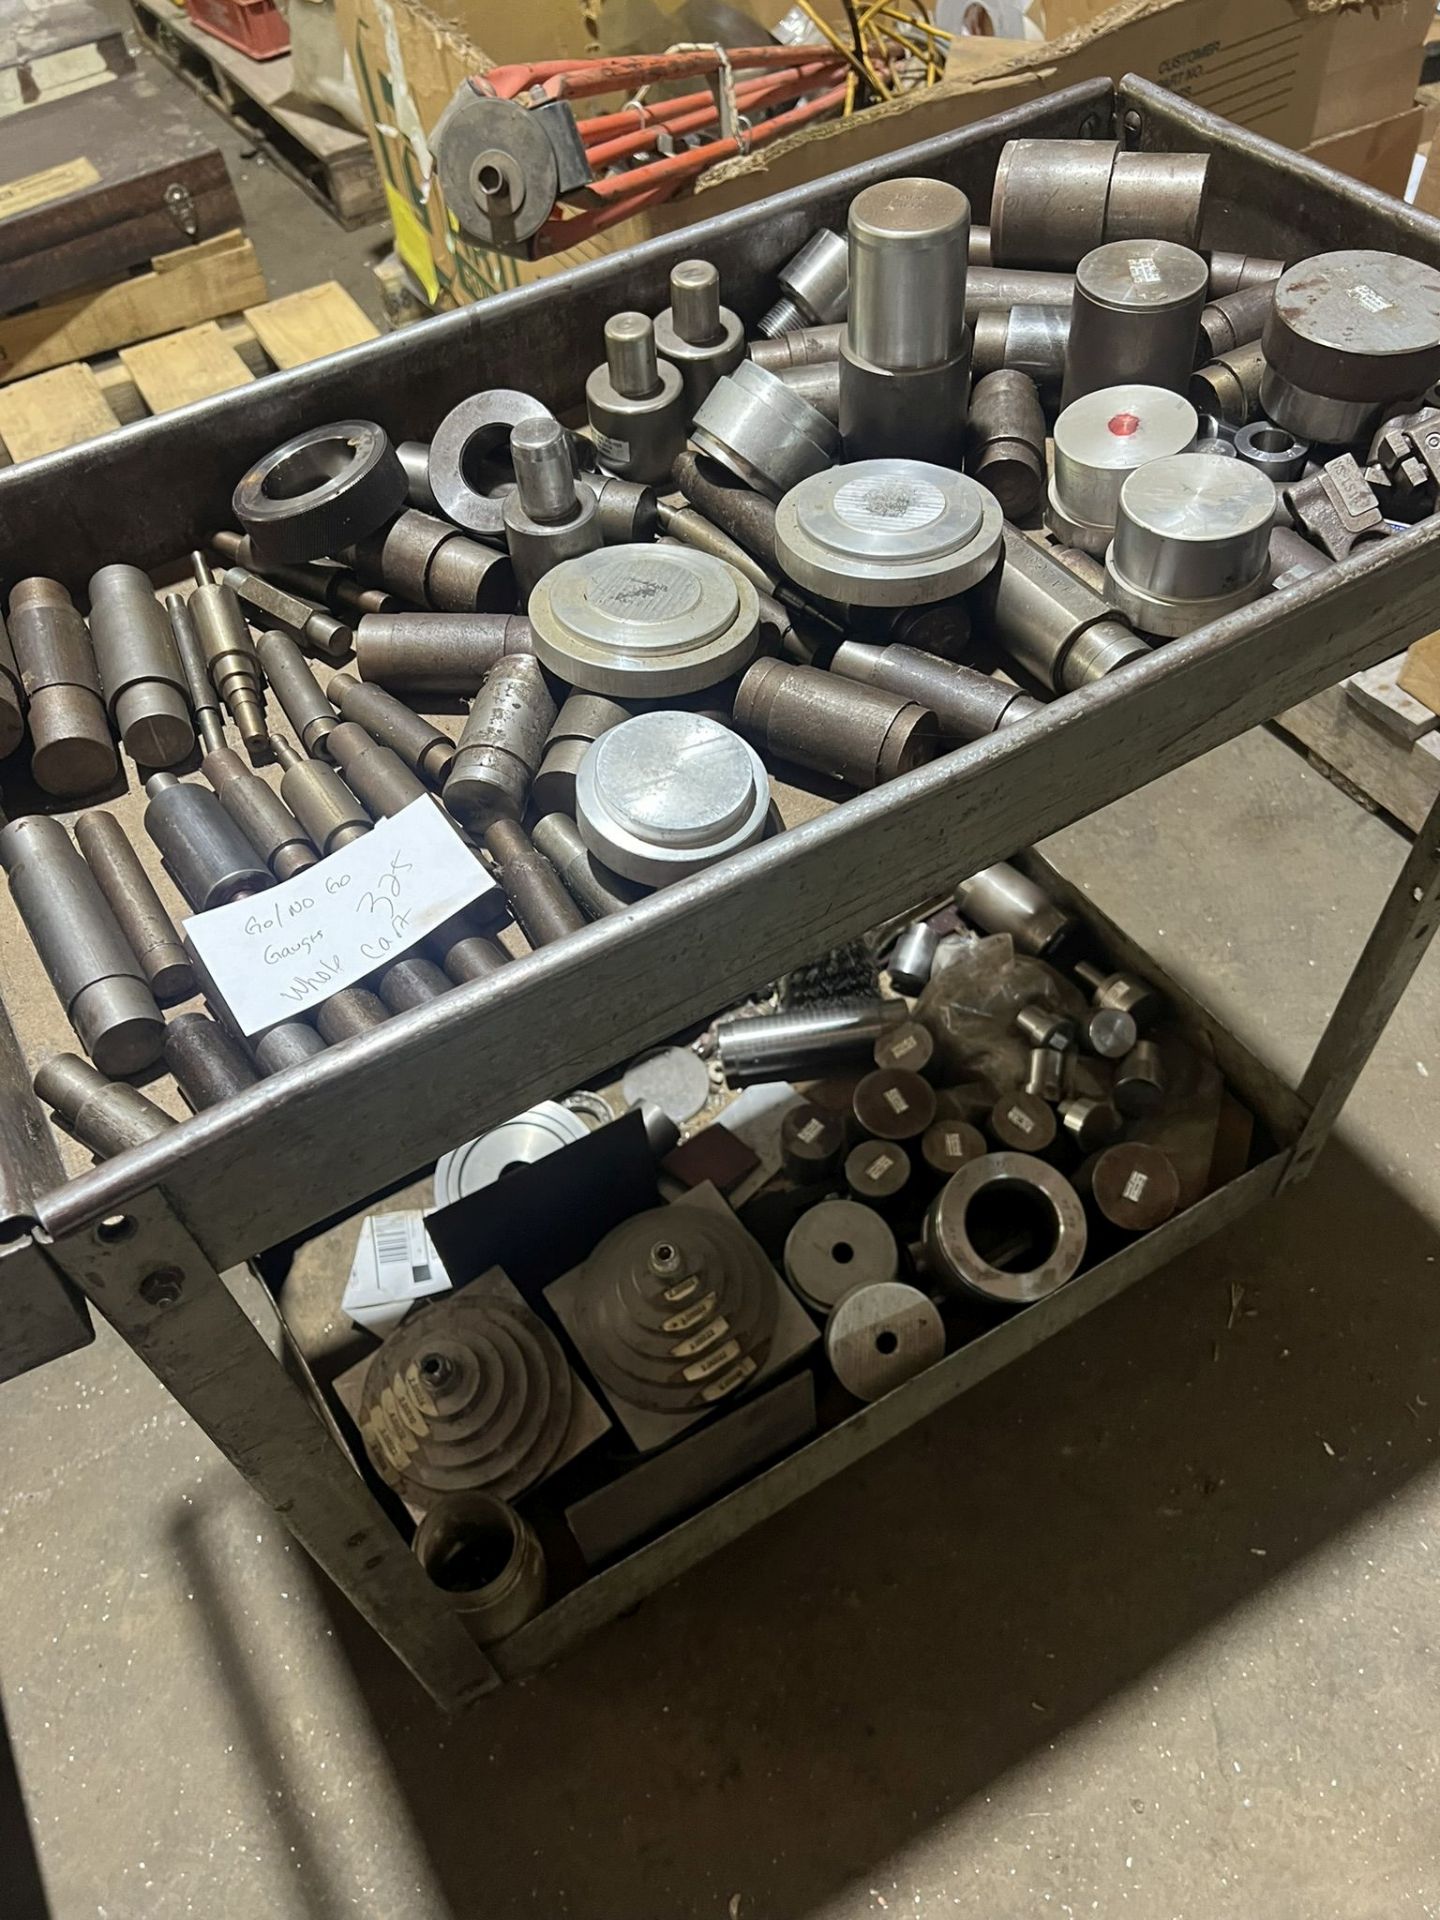 Rolling Cart with Go/No Go, Gauges, Misc. Tooling